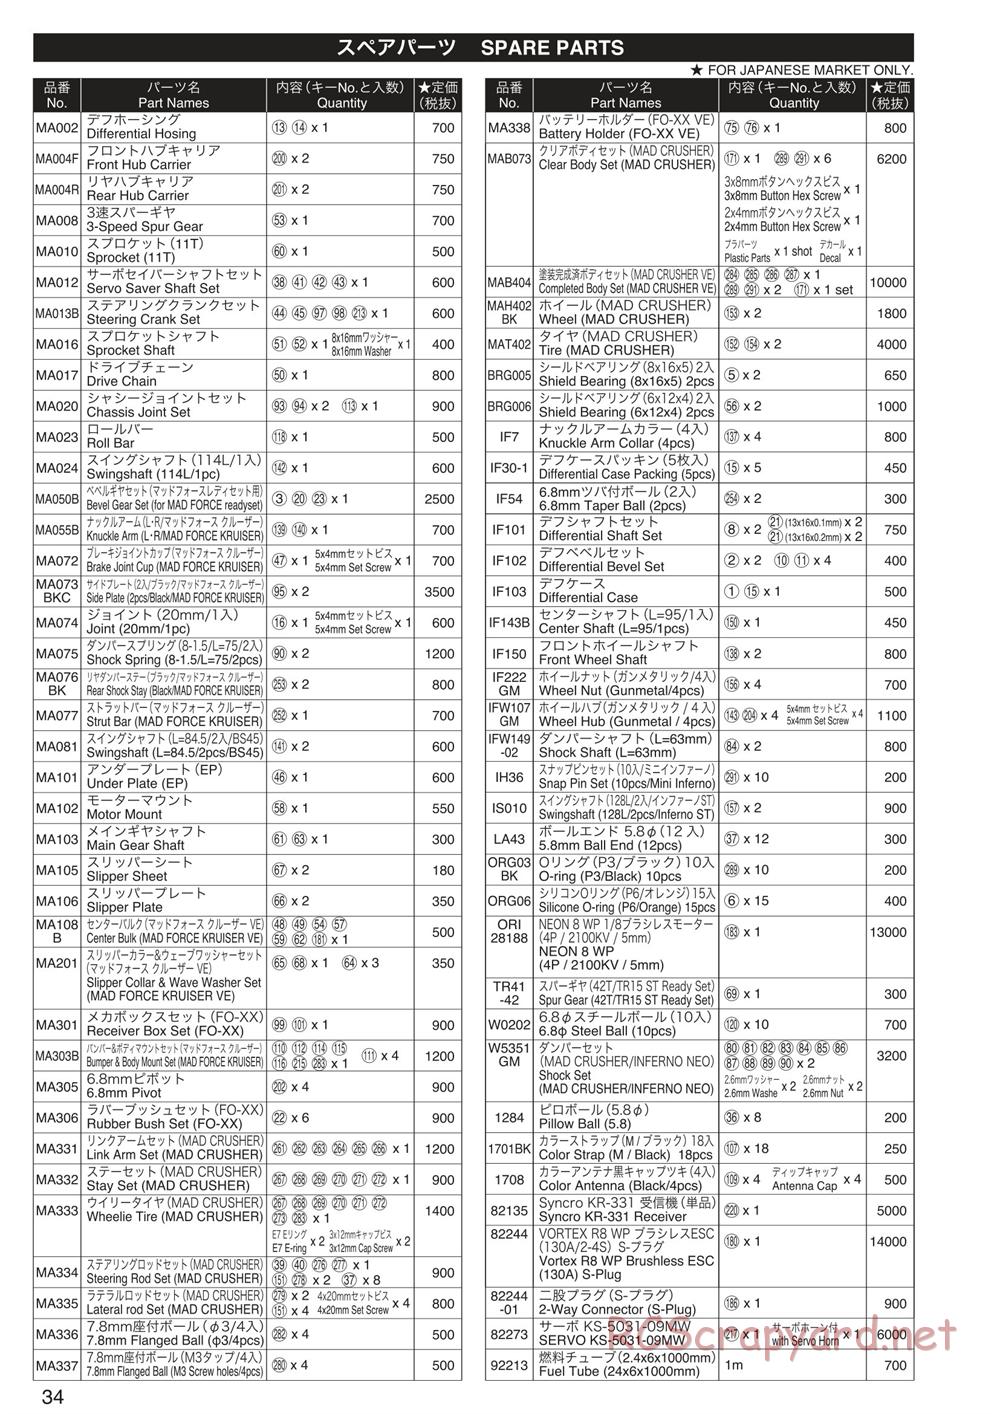 Kyosho - Mad Crusher VE - Parts List - Page 1